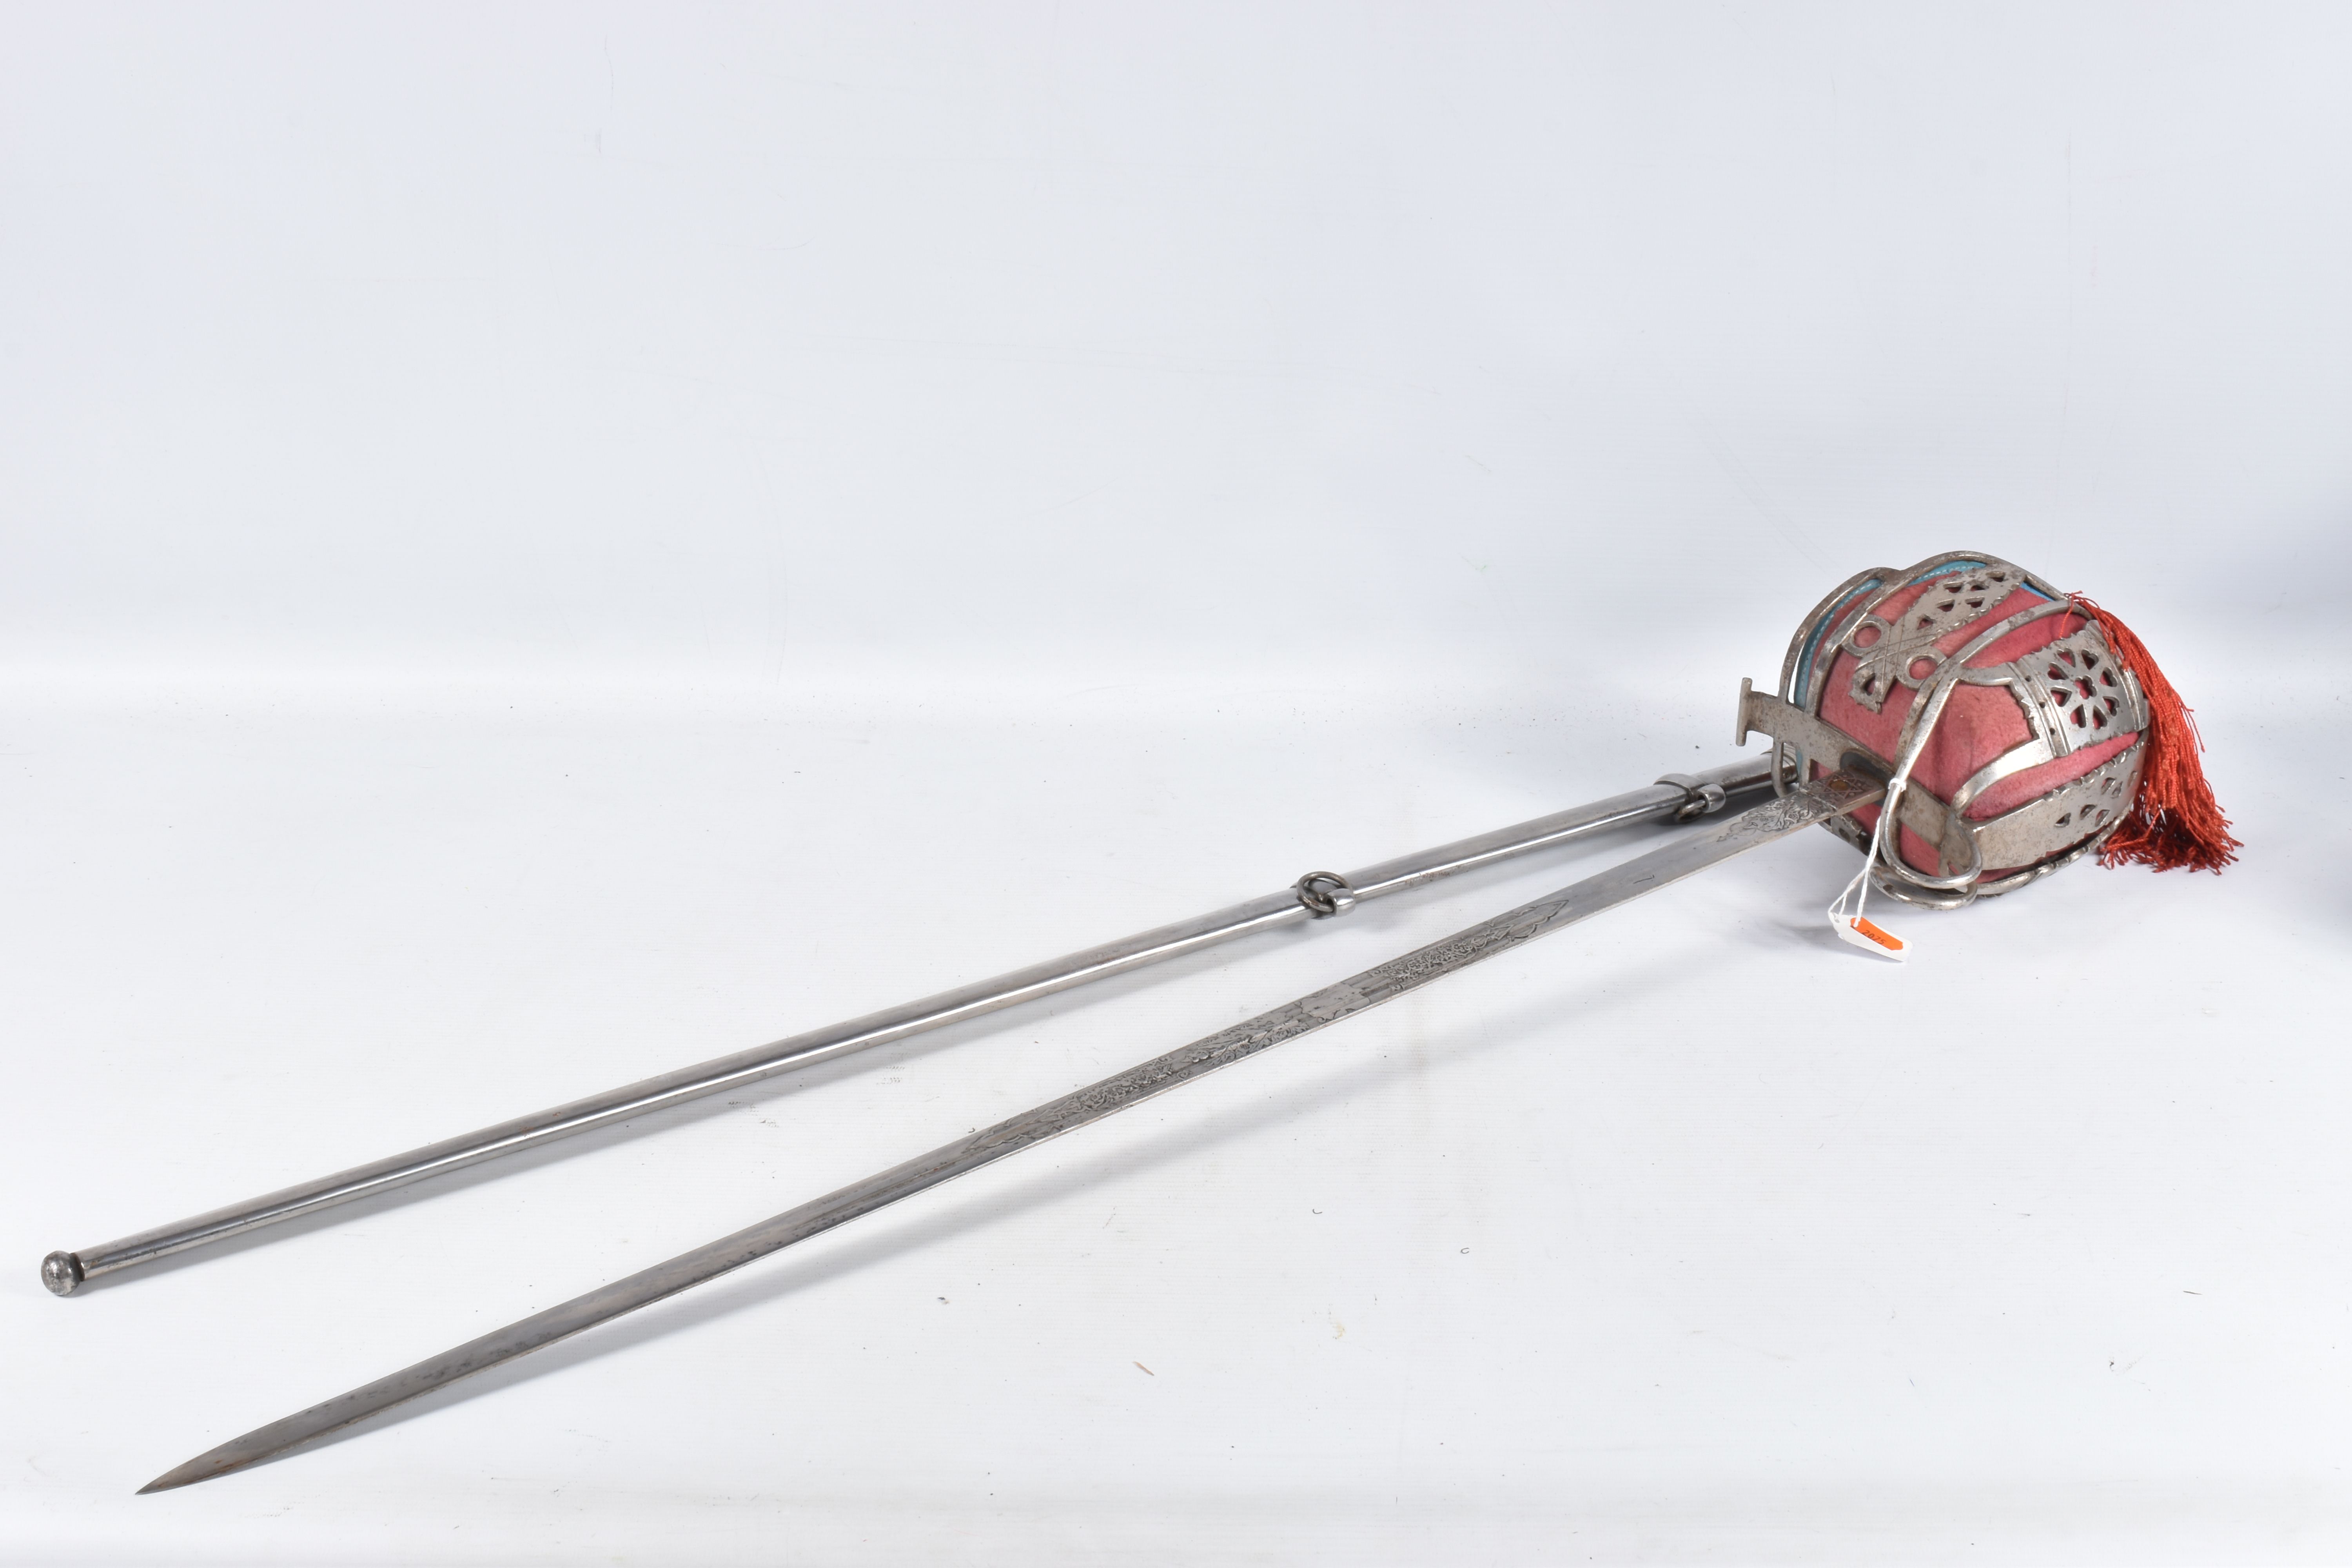 A SCOTTISH OFFICERS BASKET HILT SWORD, the blade has got ornate decoration on it but this is